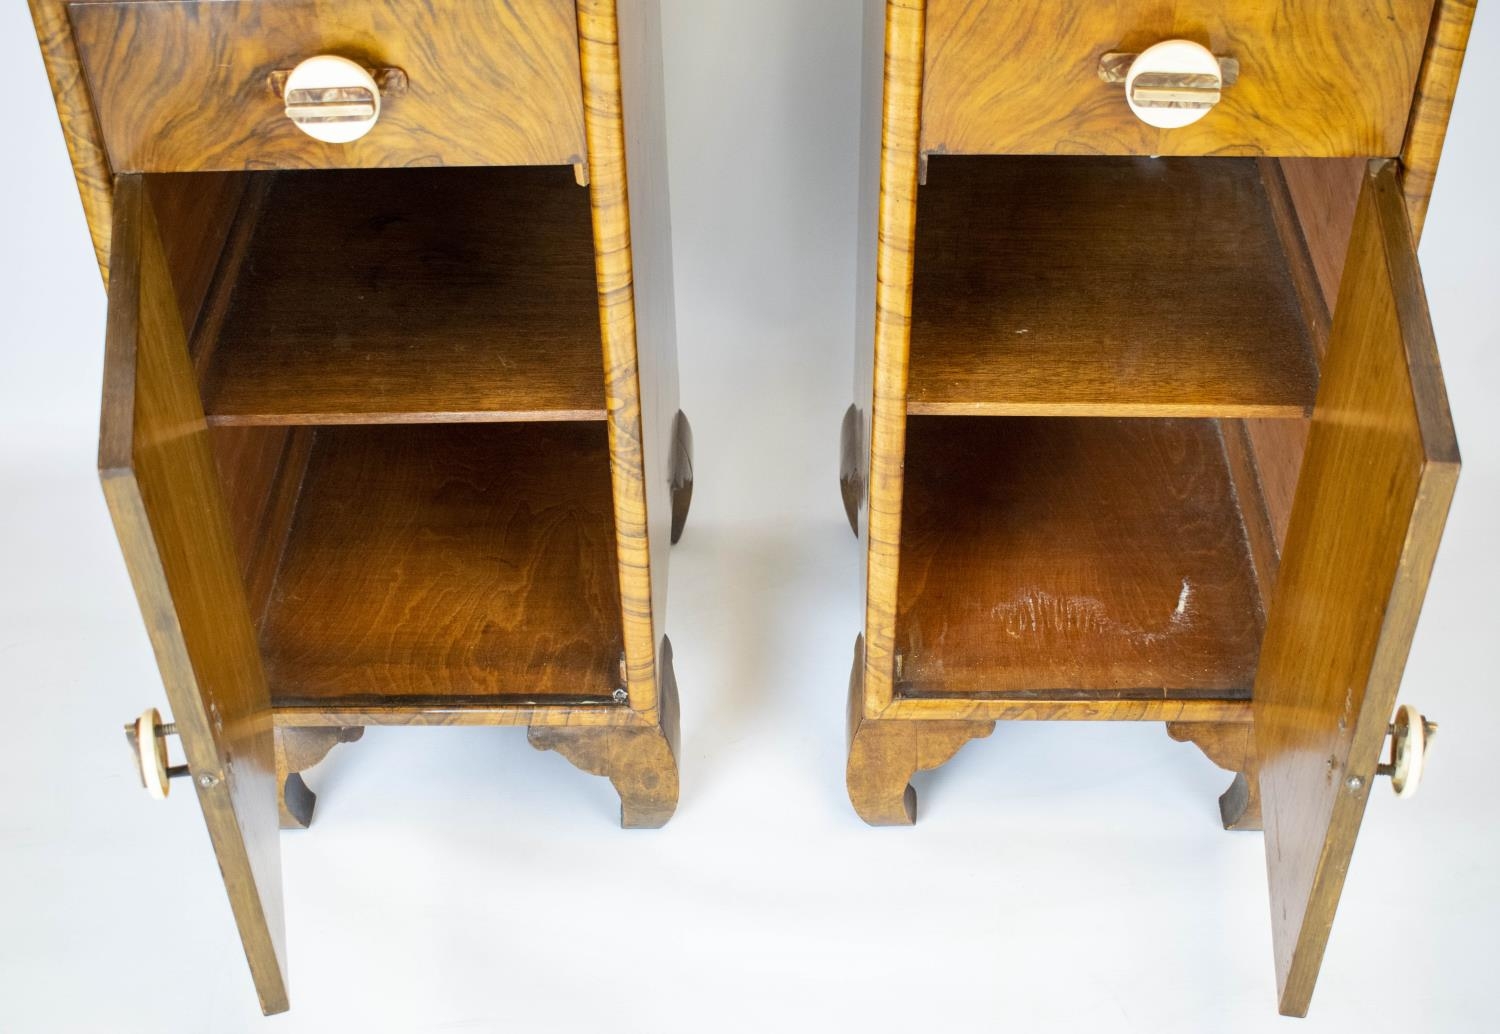 BEDSIDE CABINETS, 80cm H x 37cm W x 43cm D, a pair, Art Deco walnut, each with drawer and door - Image 5 of 6